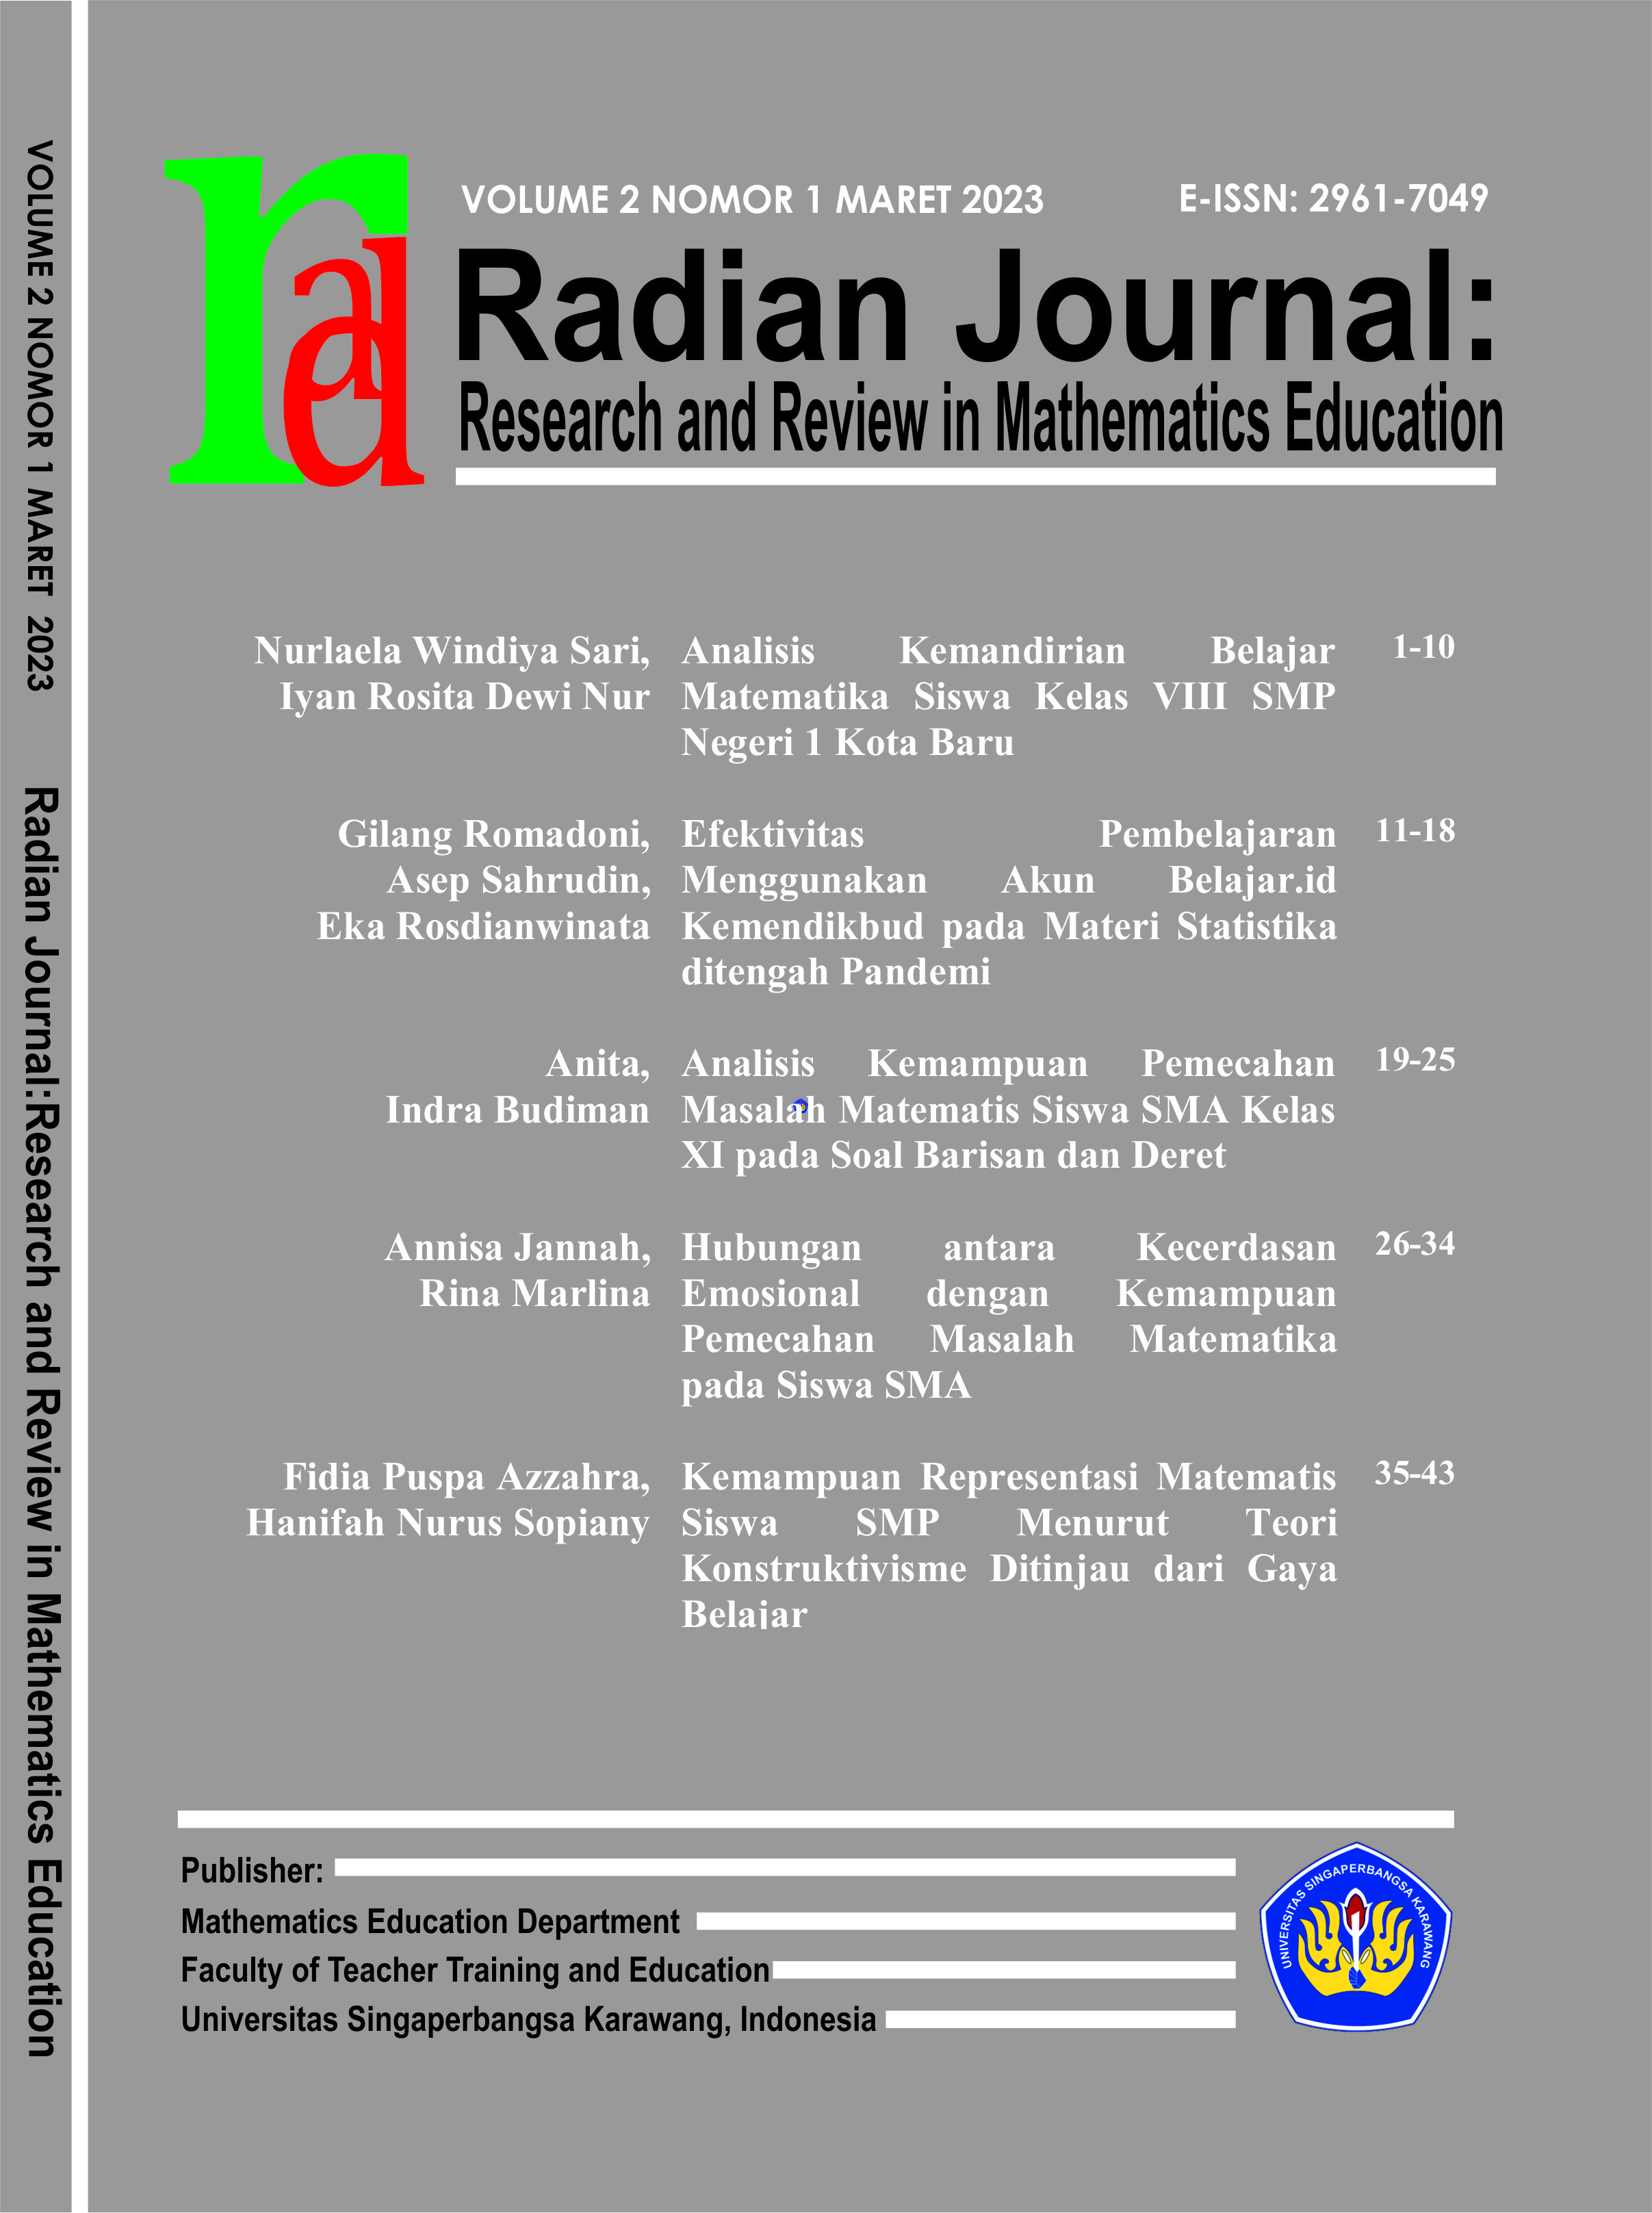 					Lihat Vol 2 No 1 (2023): Radian Journal: Research and Review in Mathematics Education 
				